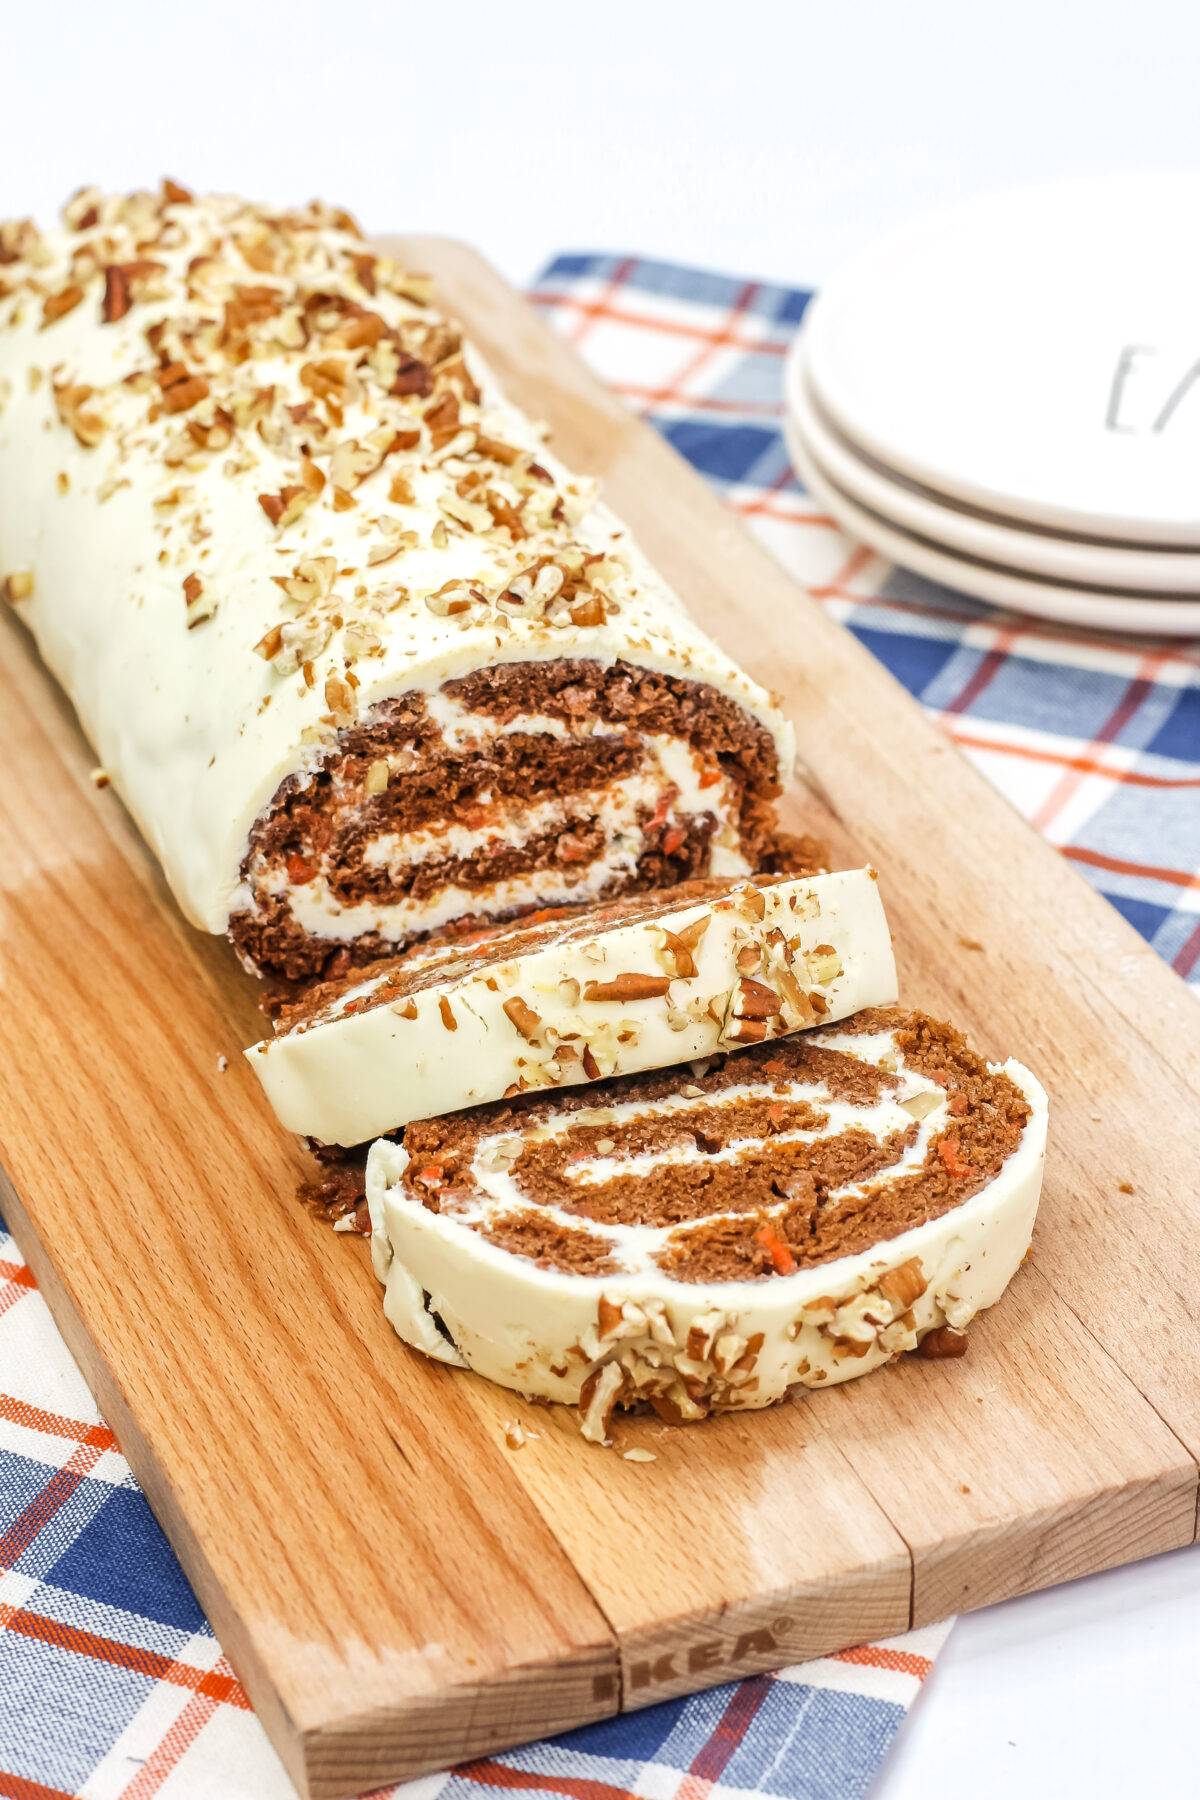 Here is a yummy recipe for Carrot Cake Roll with Cream Cheese Filling with a moist and tender crumb. It's the perfect dessert for Easter!